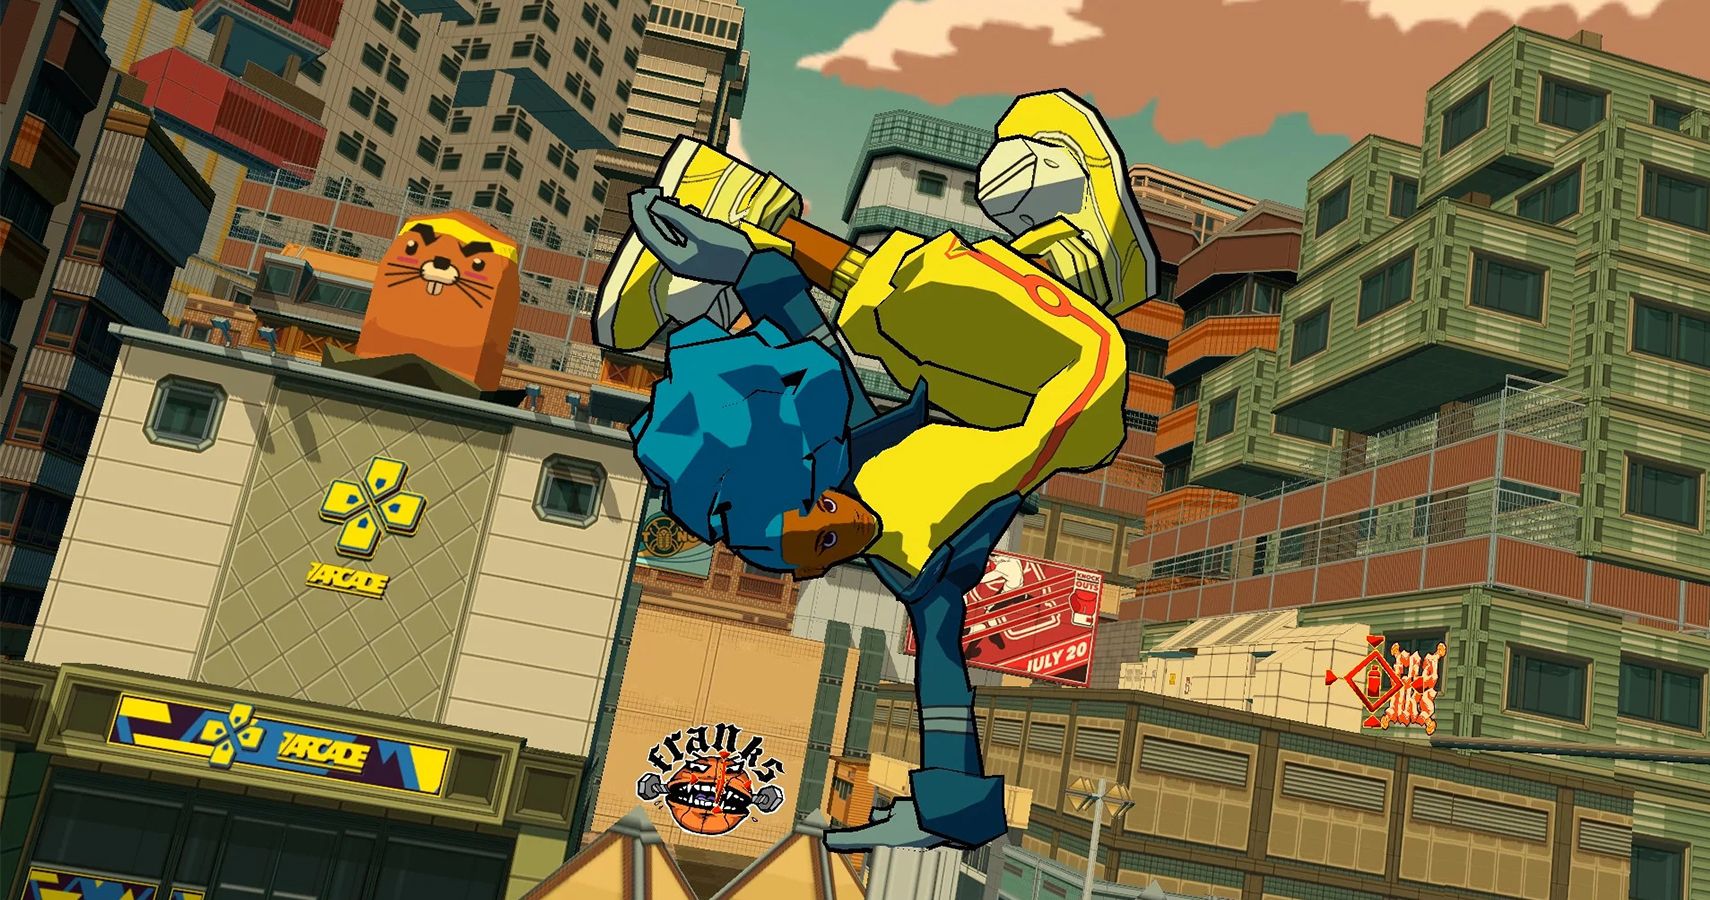 Bomb Rush Cyberfunk promo image of person in yellow jumpsuit doing a handplant